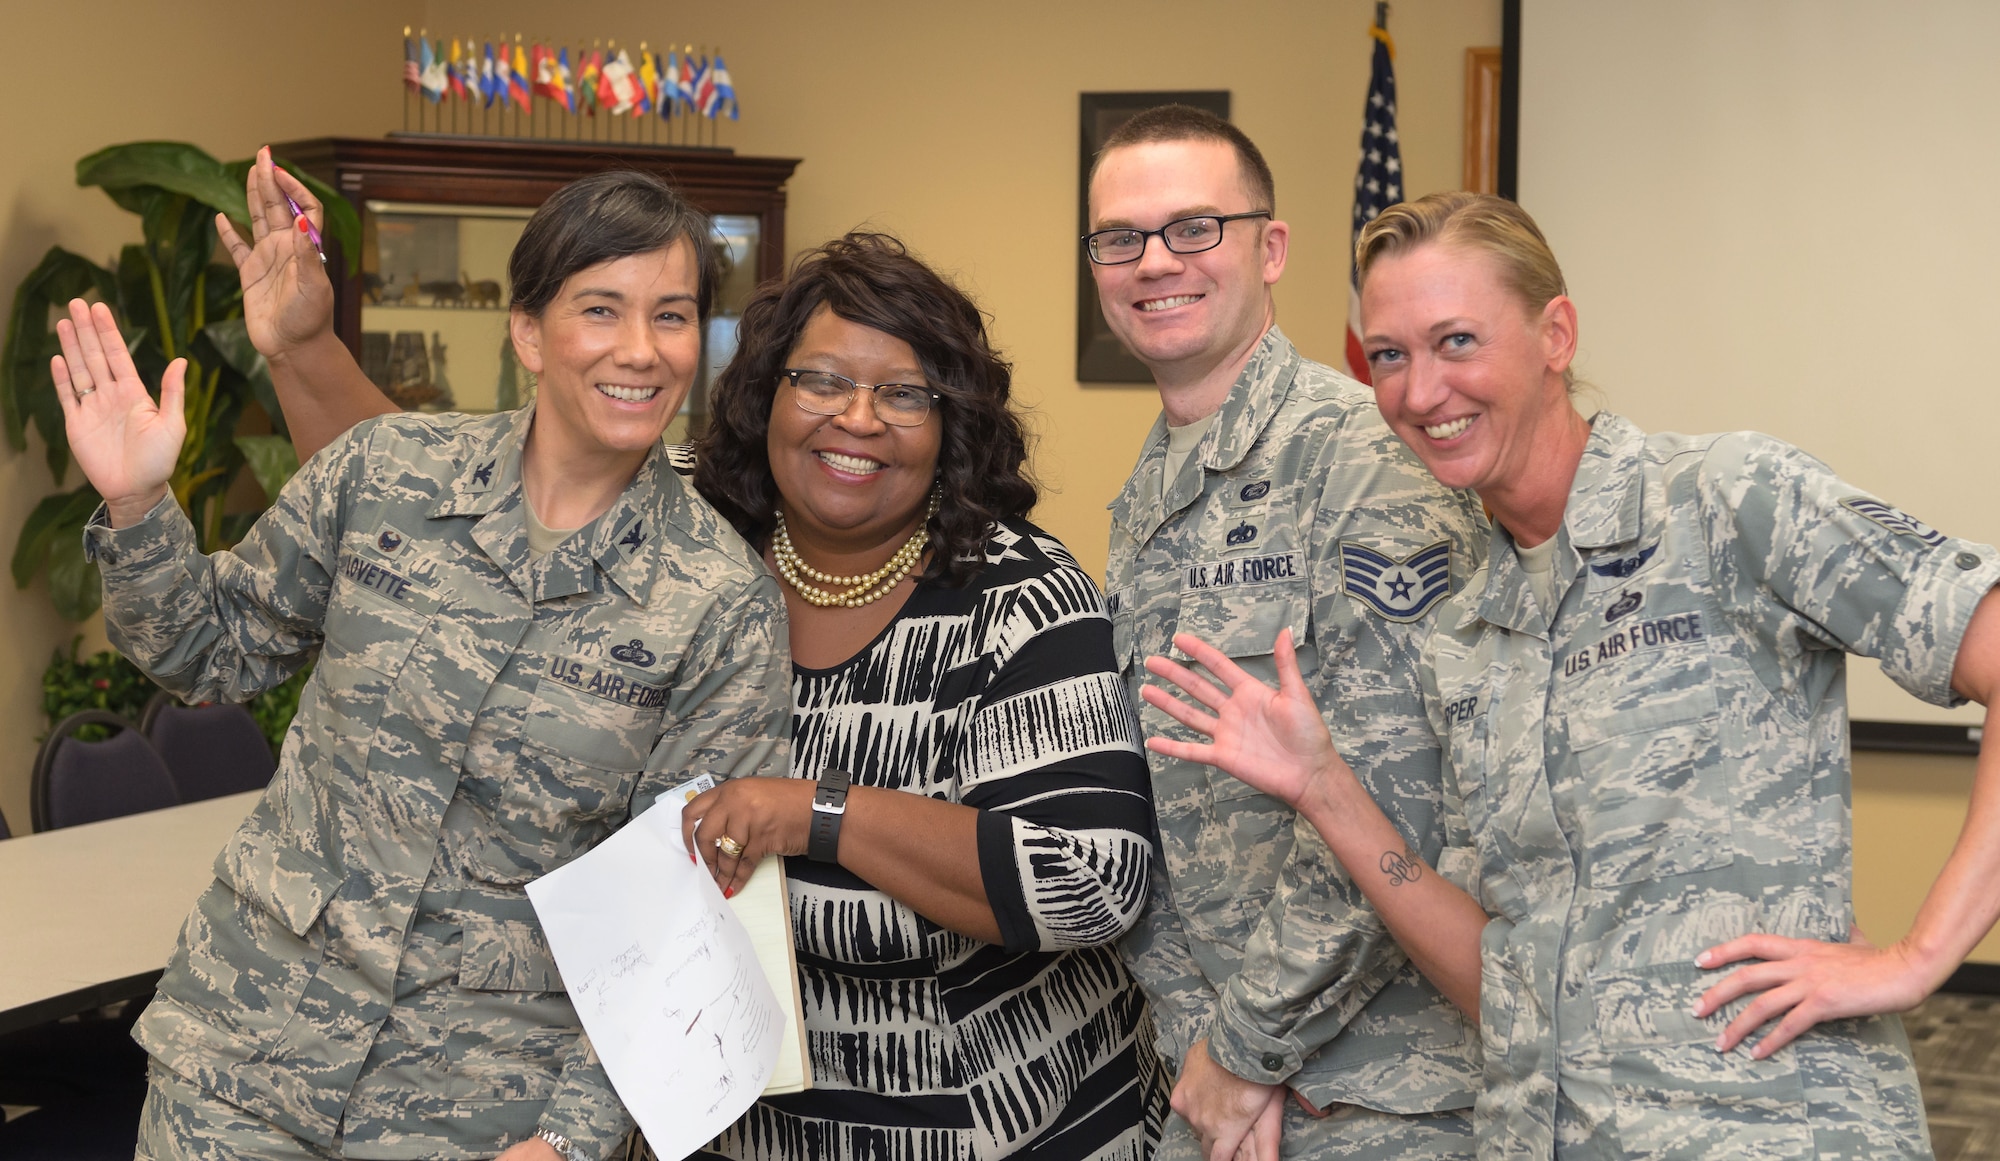 Col. Debra Lovette, 81st Training Wing commander, poses for a photo with Equal Opportunity Office staff members during a Wing Staff Agency orientation tour June 26, 2017, on Keesler Air Force Base, Miss. The tour familiarized Lovette with the Wing Staff Agency mission, operations and personnel. (U.S. Air Force photo by Andrew Whitman) 